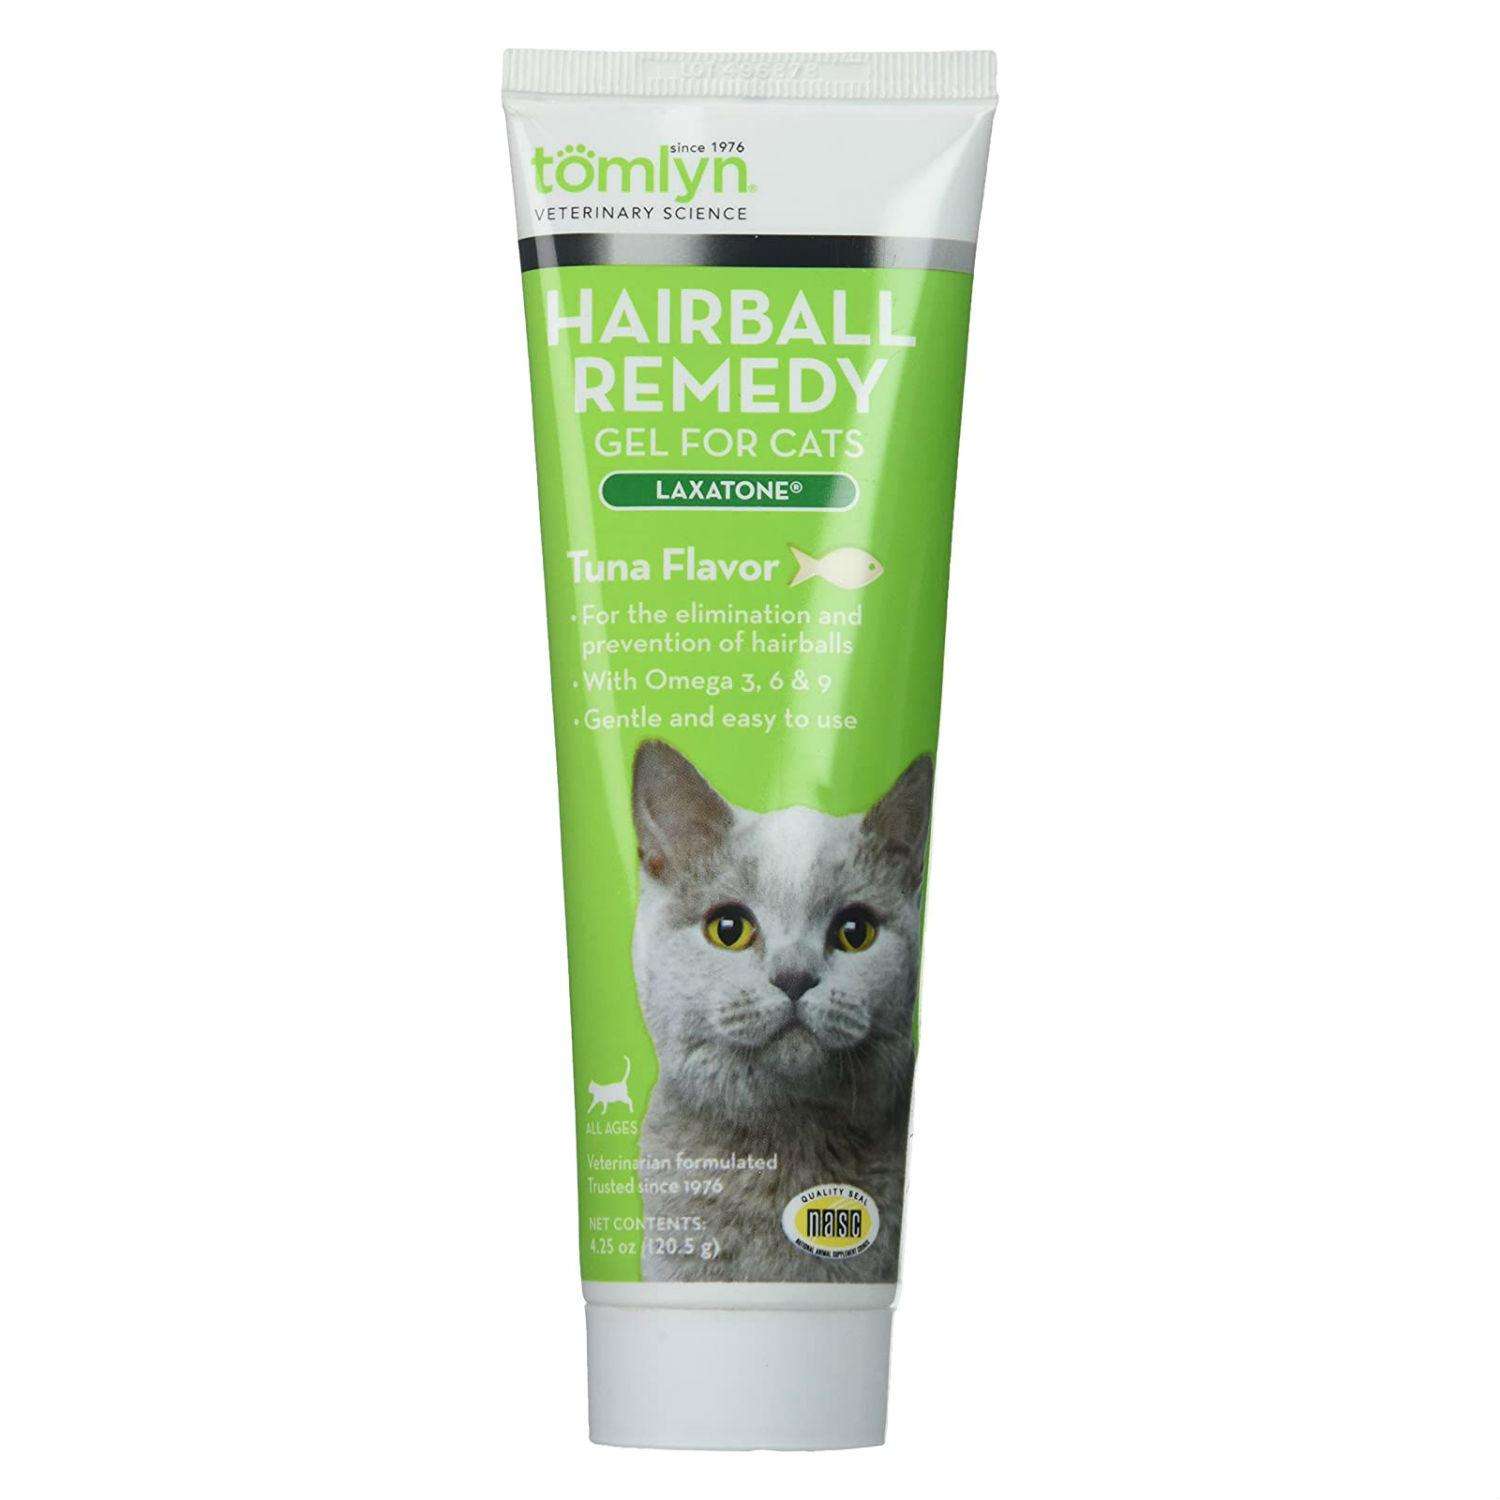 Tomlyn Laxatone Hairball Remedy Gel for Cats ...